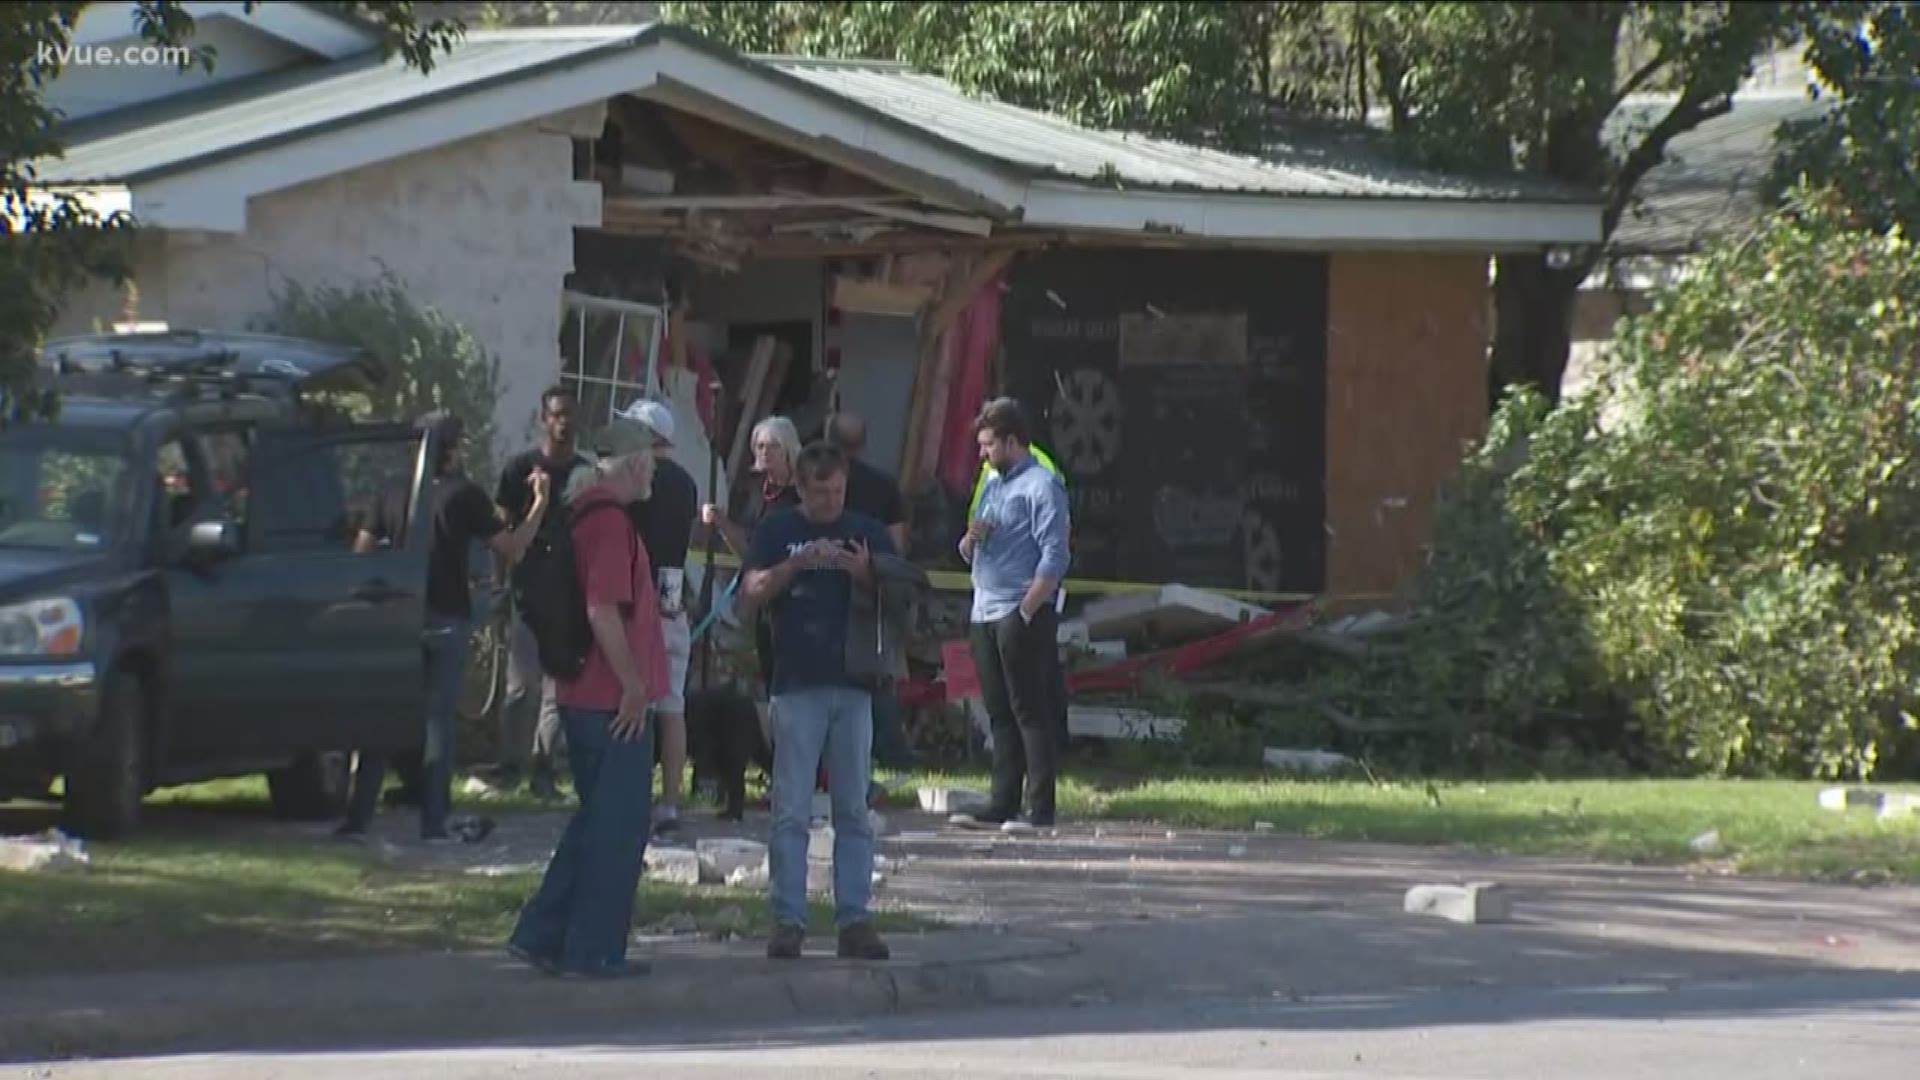 The bus crashed into a house in North Austin on Monday.